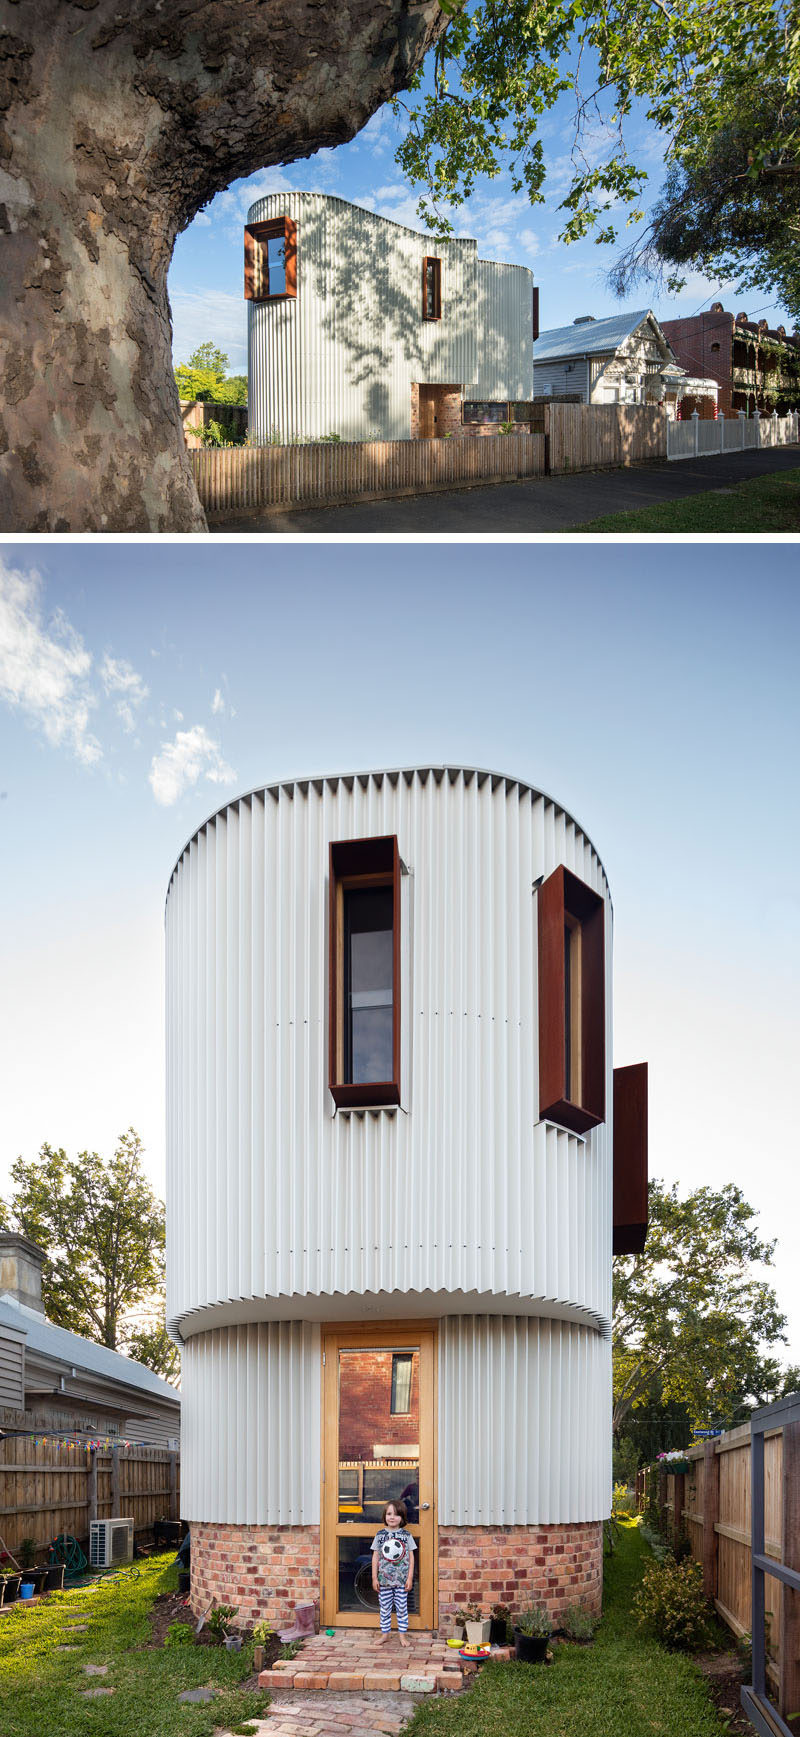 This modern house is covered in a custom made zig-zag metal facade that creates a continuous curving appearance, that sits on top of reclaimed brick and is broken up by rusted steel hoods around the windows.